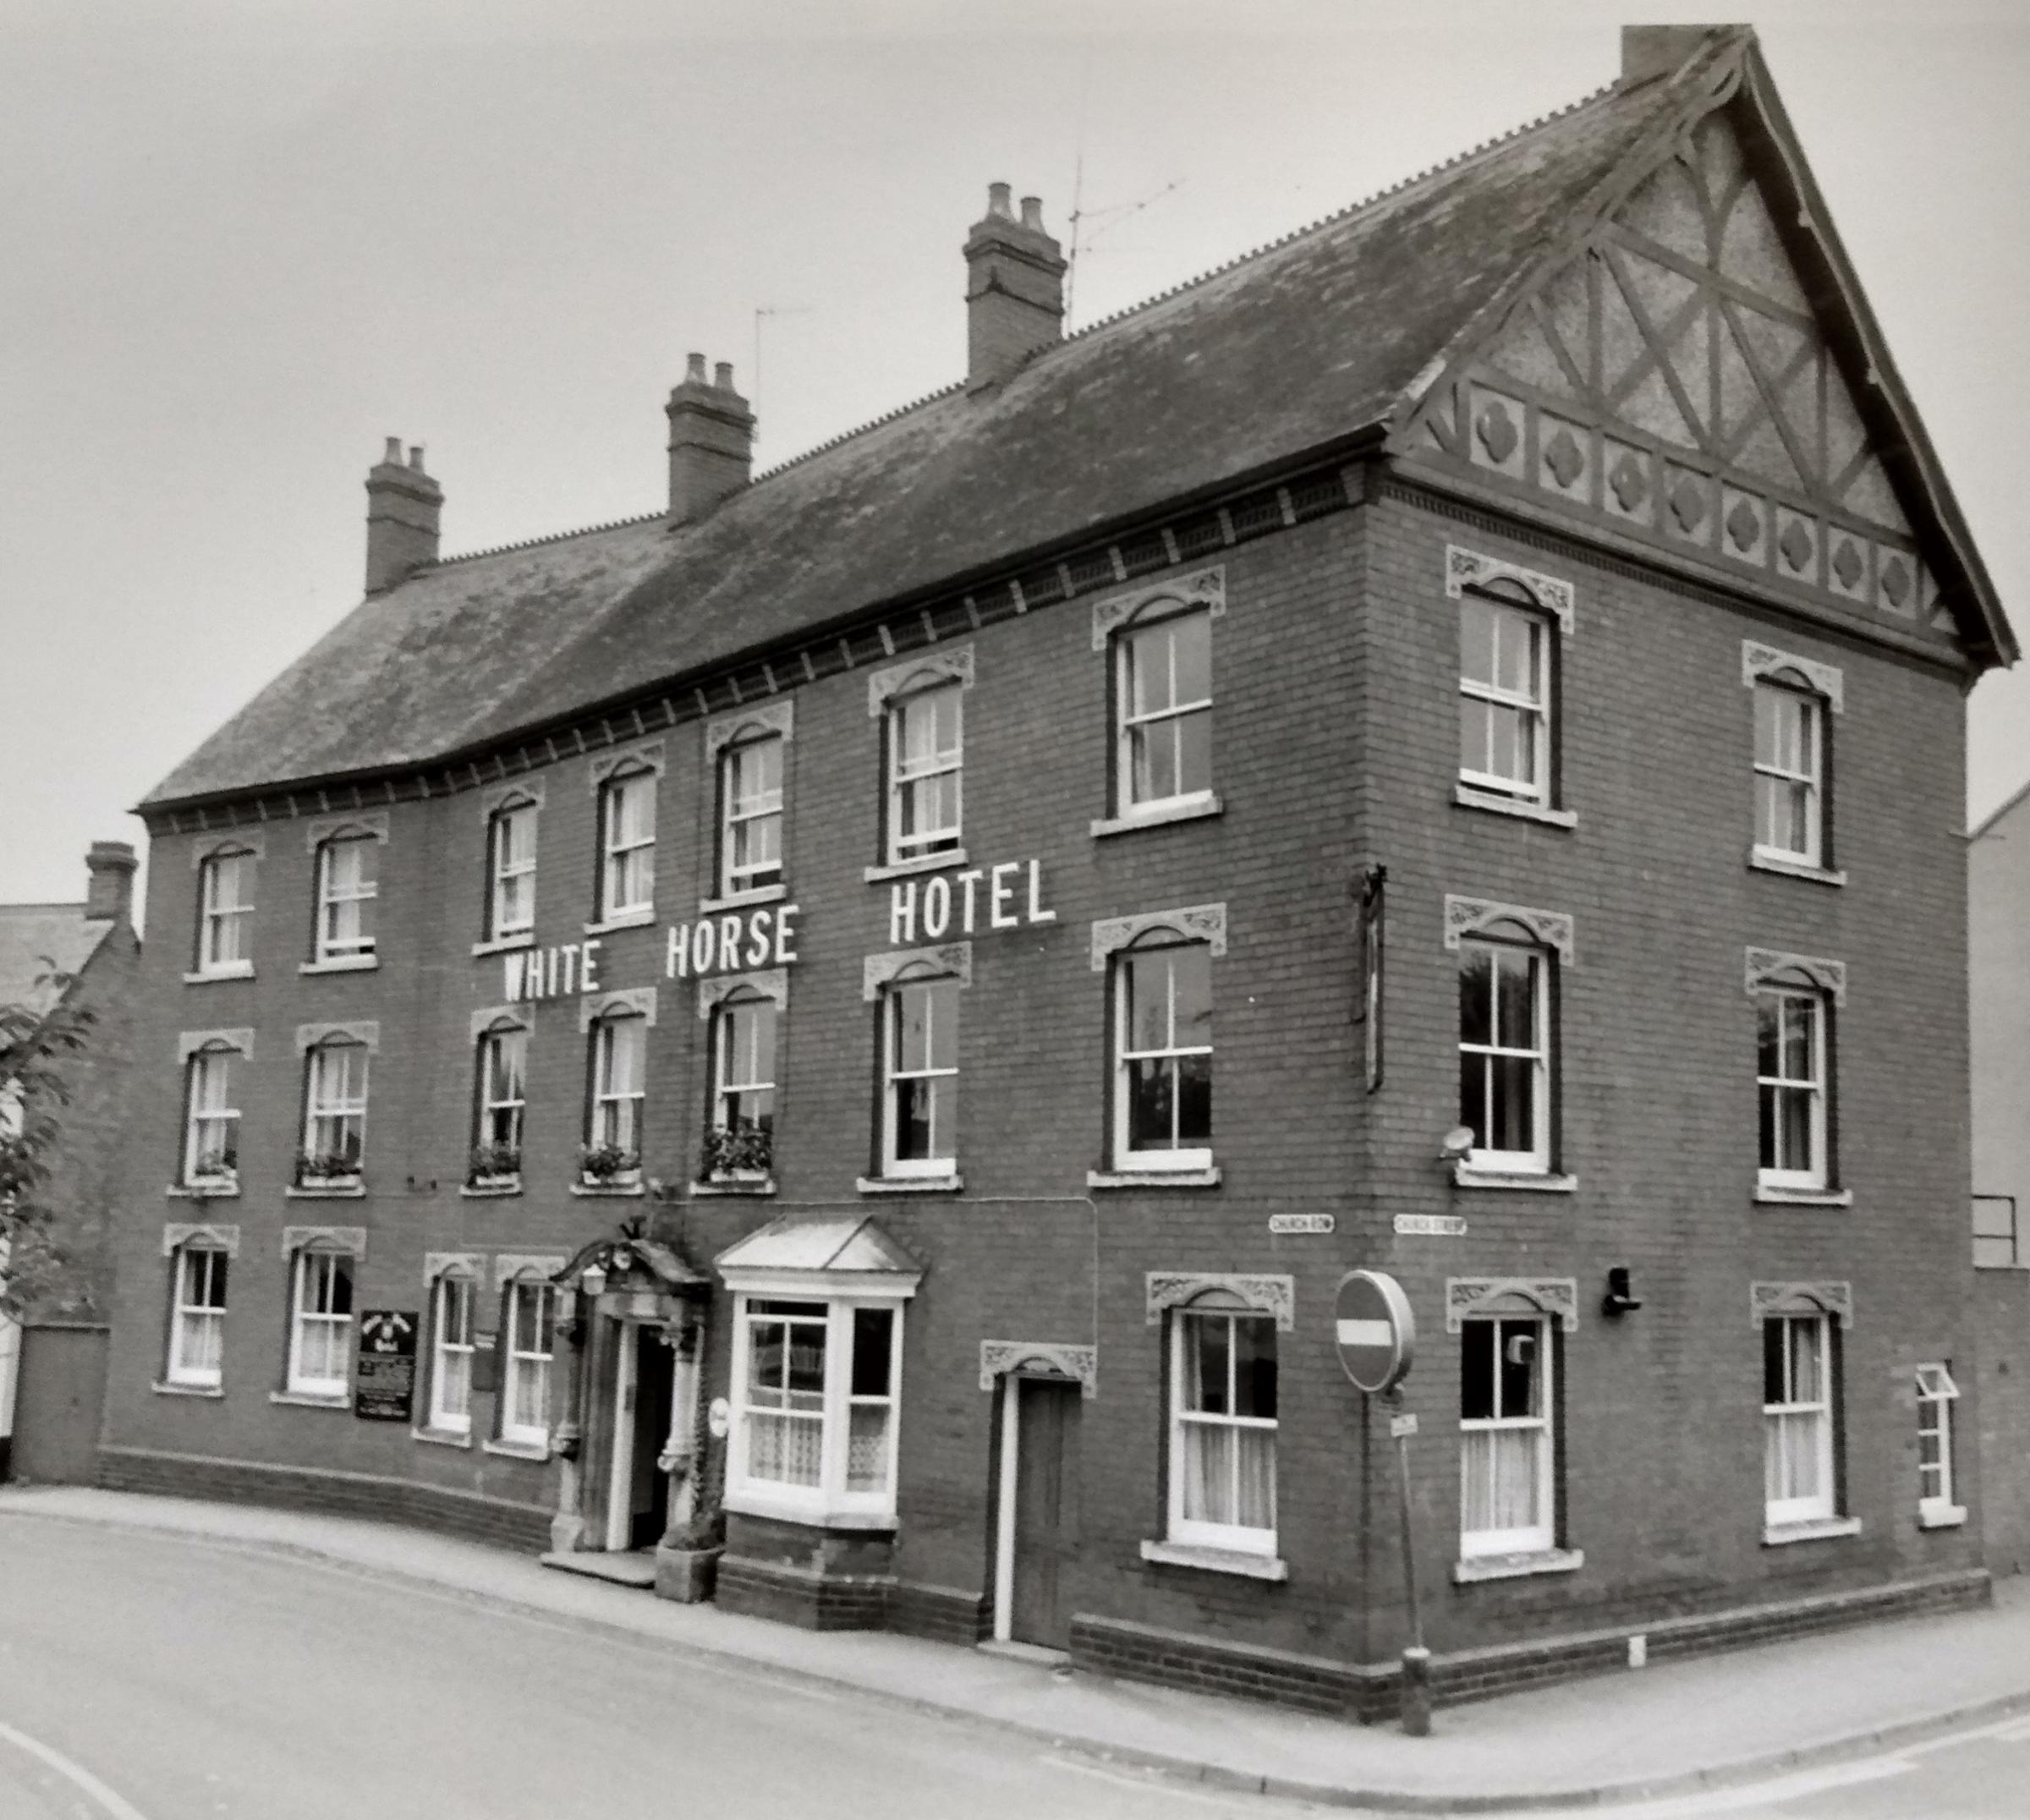 The White Horse Hotel in Church Row, Pershore, as it looked in September 1983 